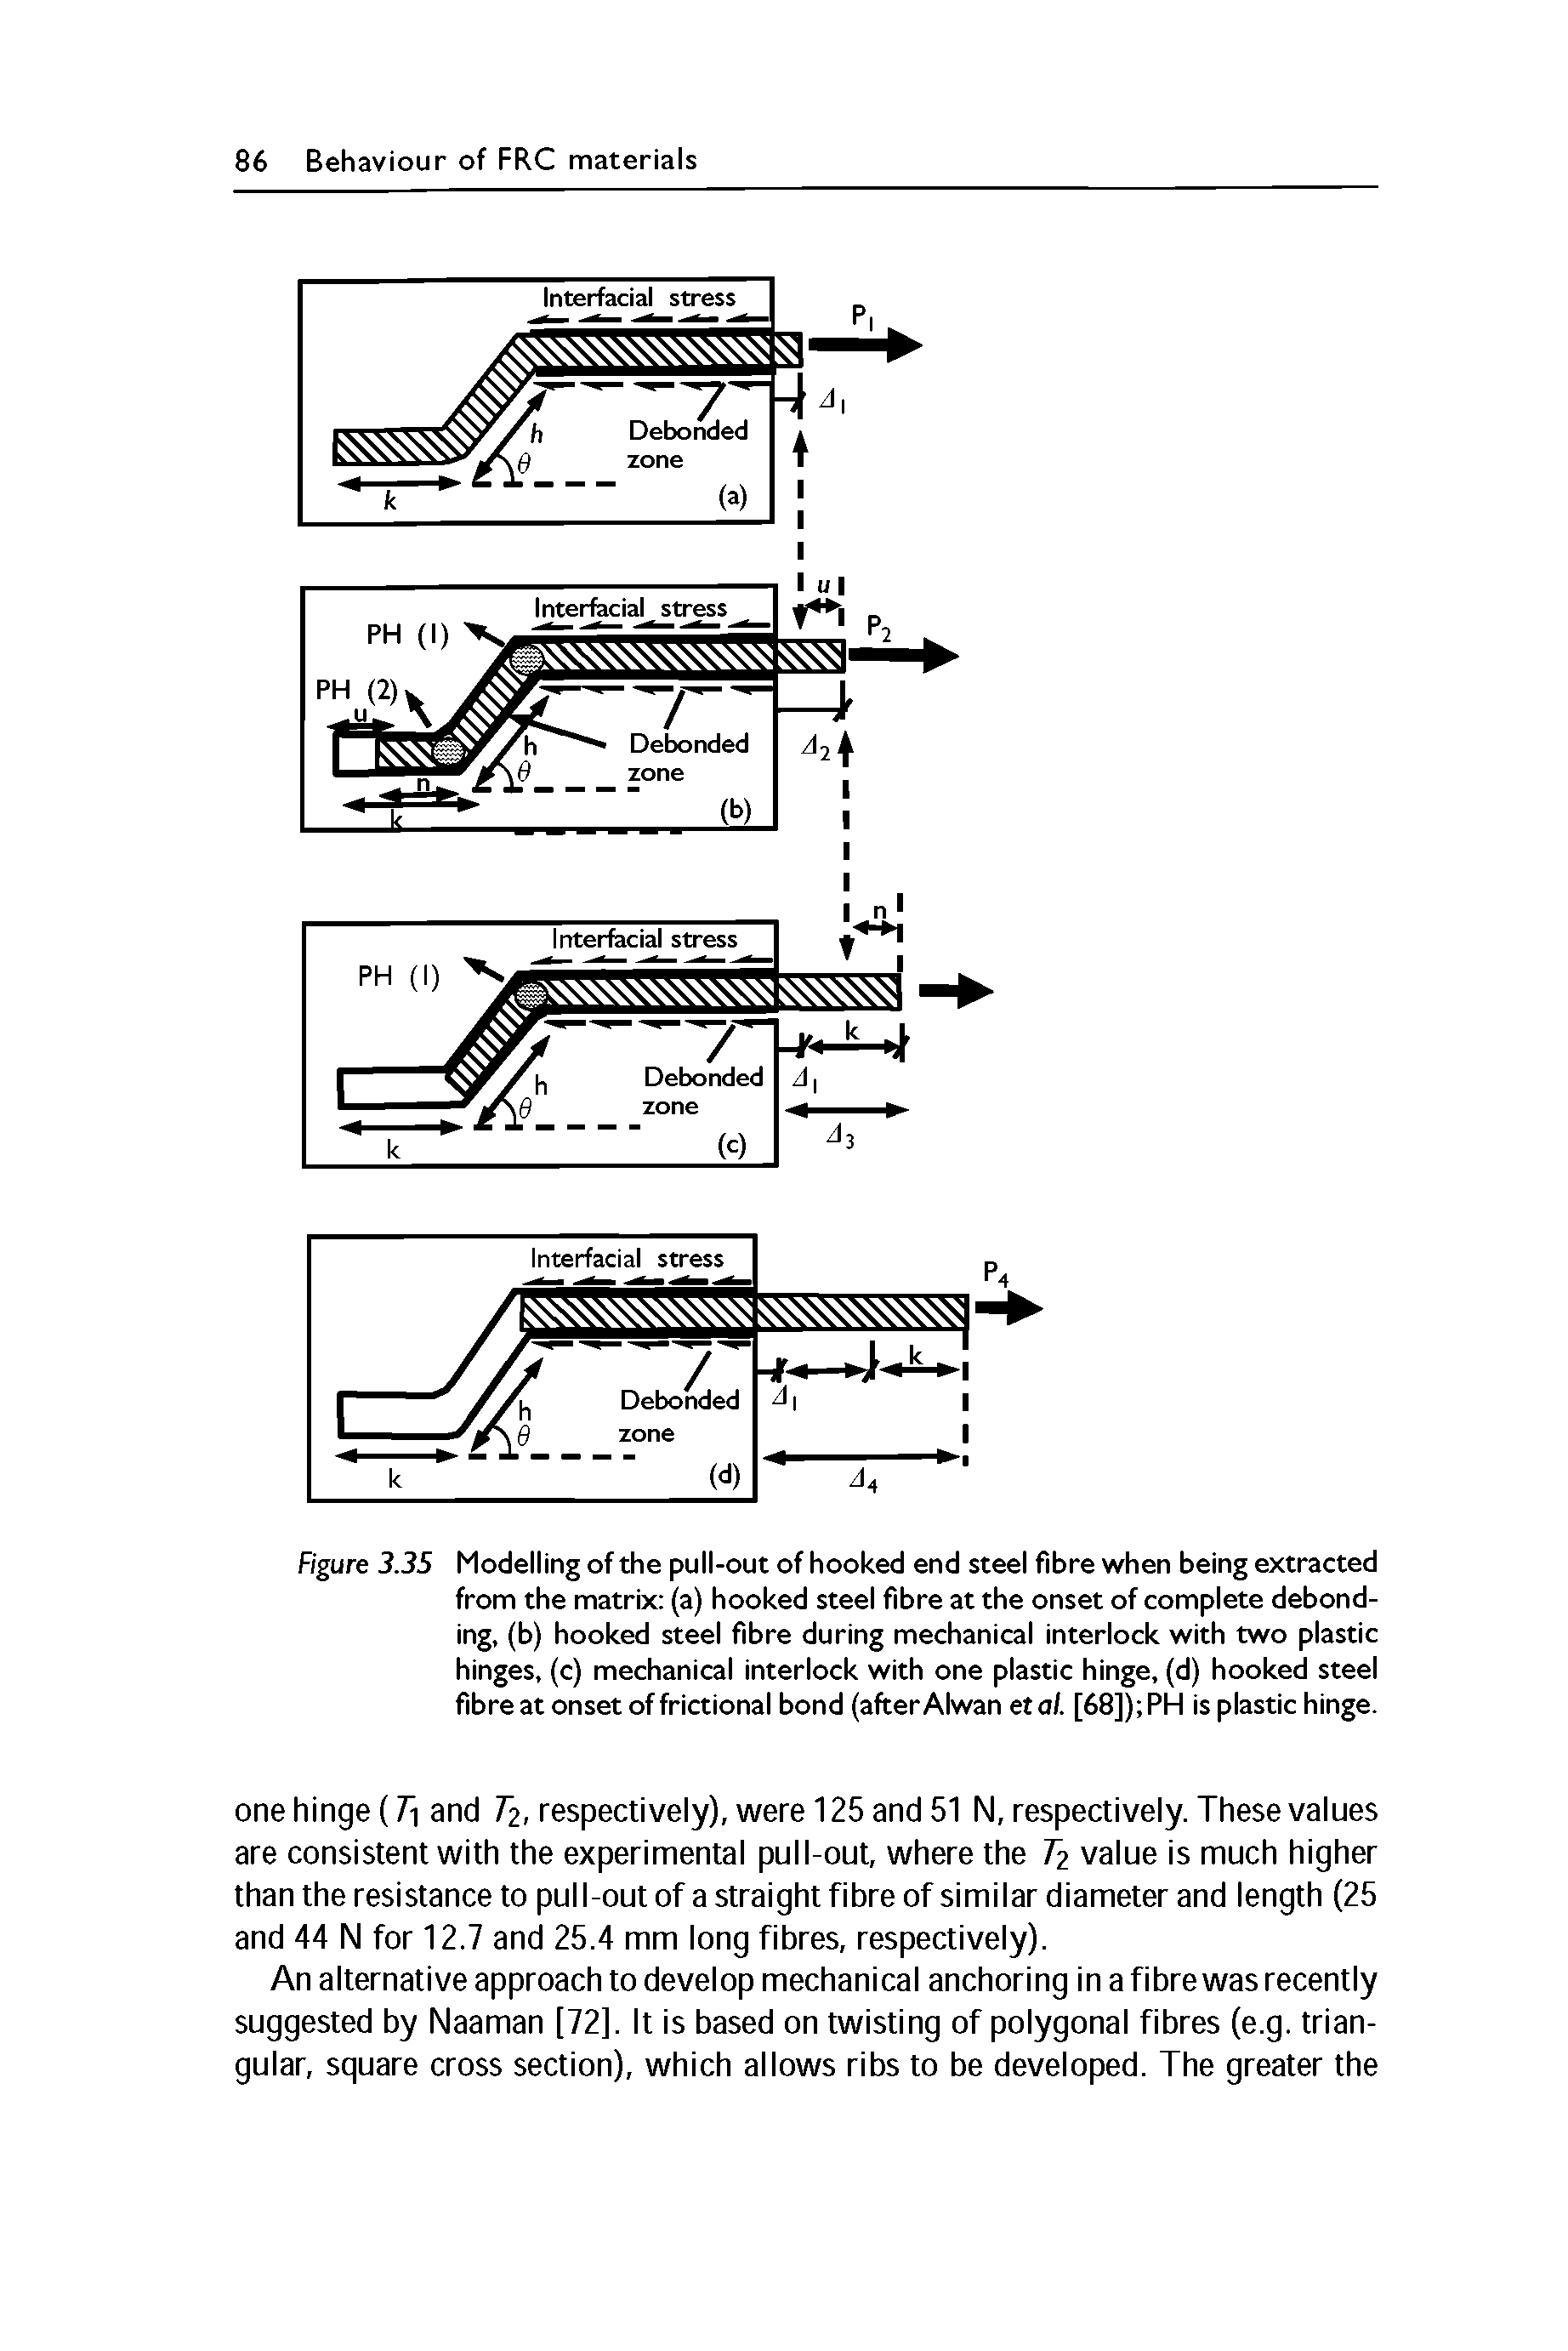 Figure 3.35 Modelling of the pull-out of hooked end steel fibre when being extracted from the matrix (a) hooked steel fibre at the onset of complete debonding, (b) hooked steel fibre during mechanical interlock with two plastic hinges, (c) mechanical interlock with one plastic hinge, (d) hooked steel fibre at onset of frictional bond (after Alwan etal. [68]) PH is plastic hinge.